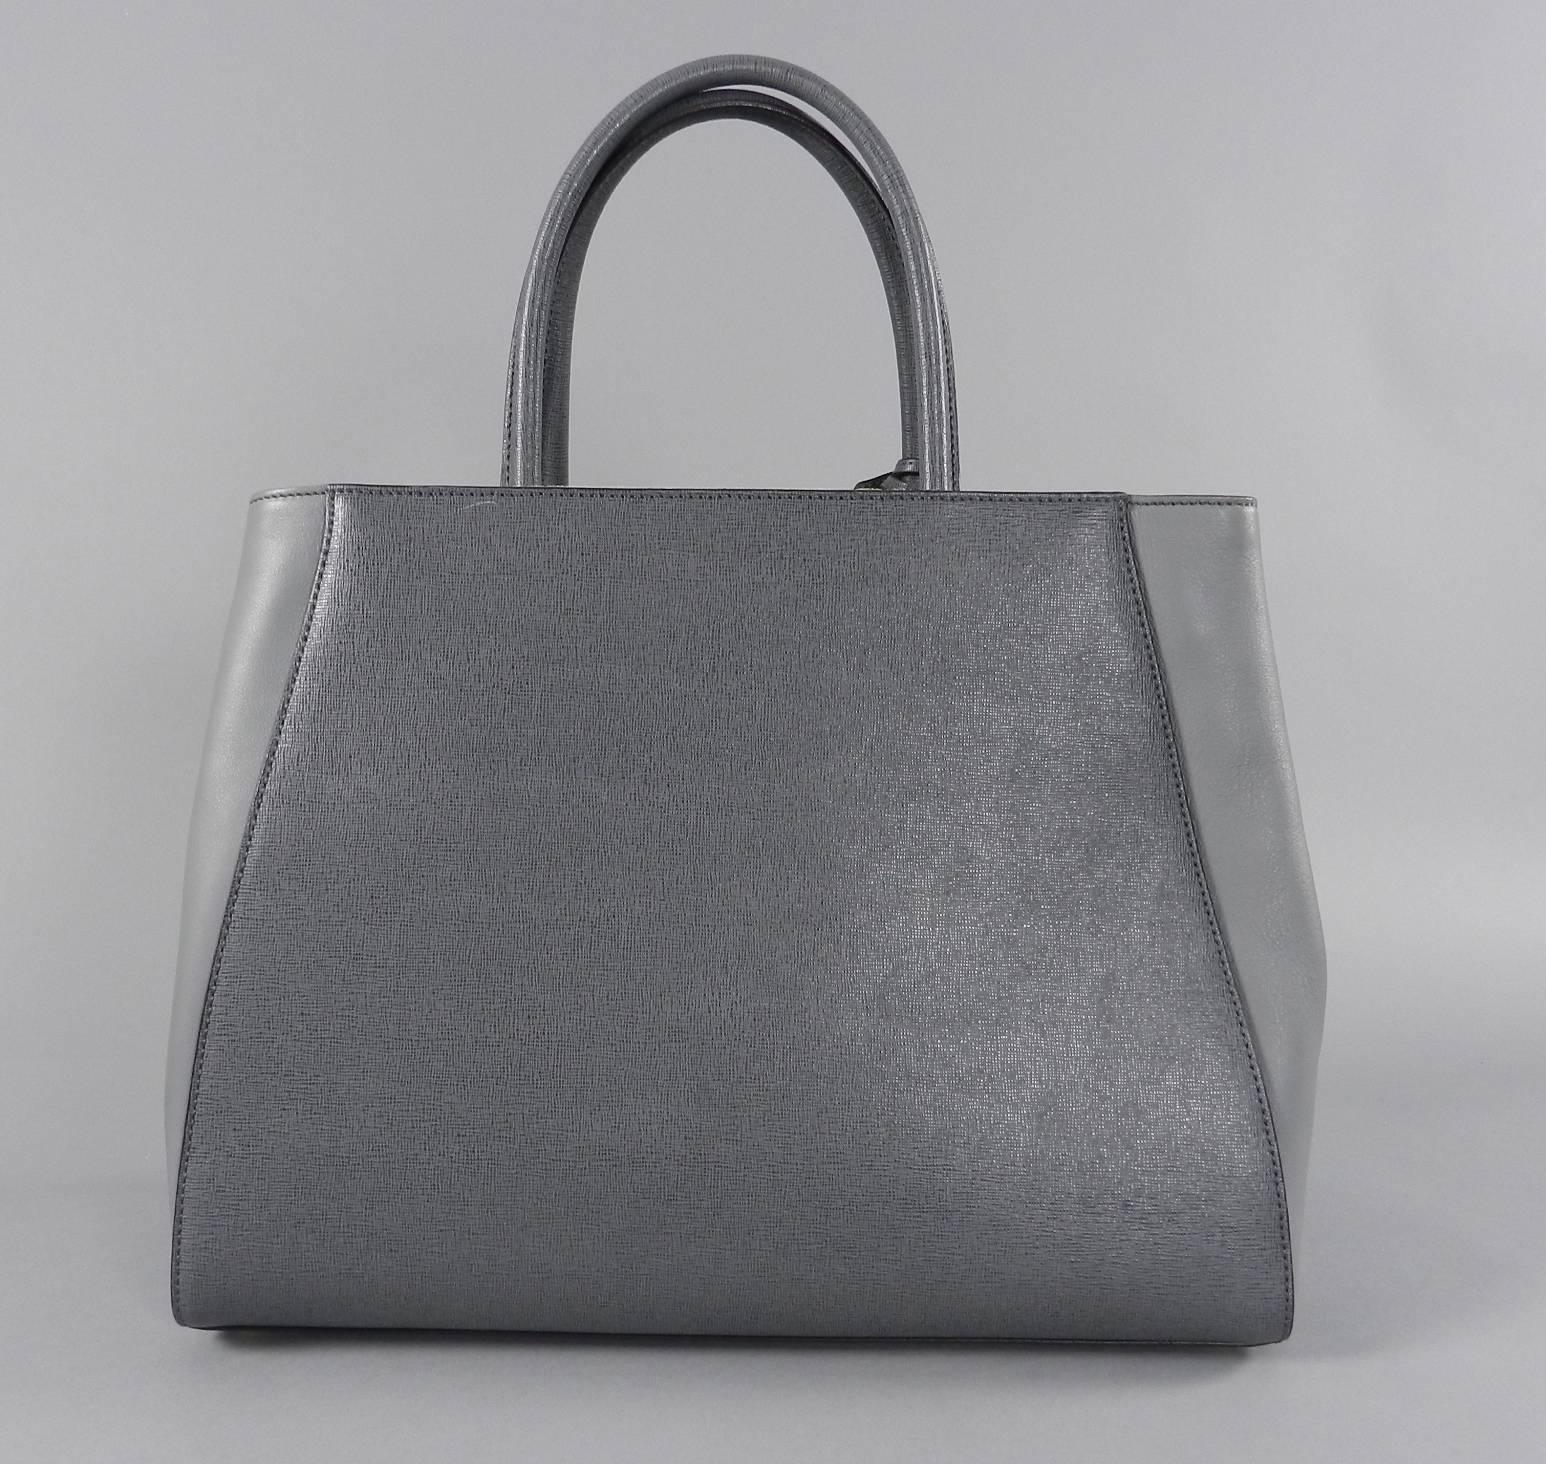 Fendi grey 2 jours medium textured shopper tote bag. Excellent pre-owned condition with cards and duster. Lined with grey striped FF logo fabric.  Double handles.  Body of bag measures about 14 x 10.75 x 6” with a 13” drop strap. 

We ship